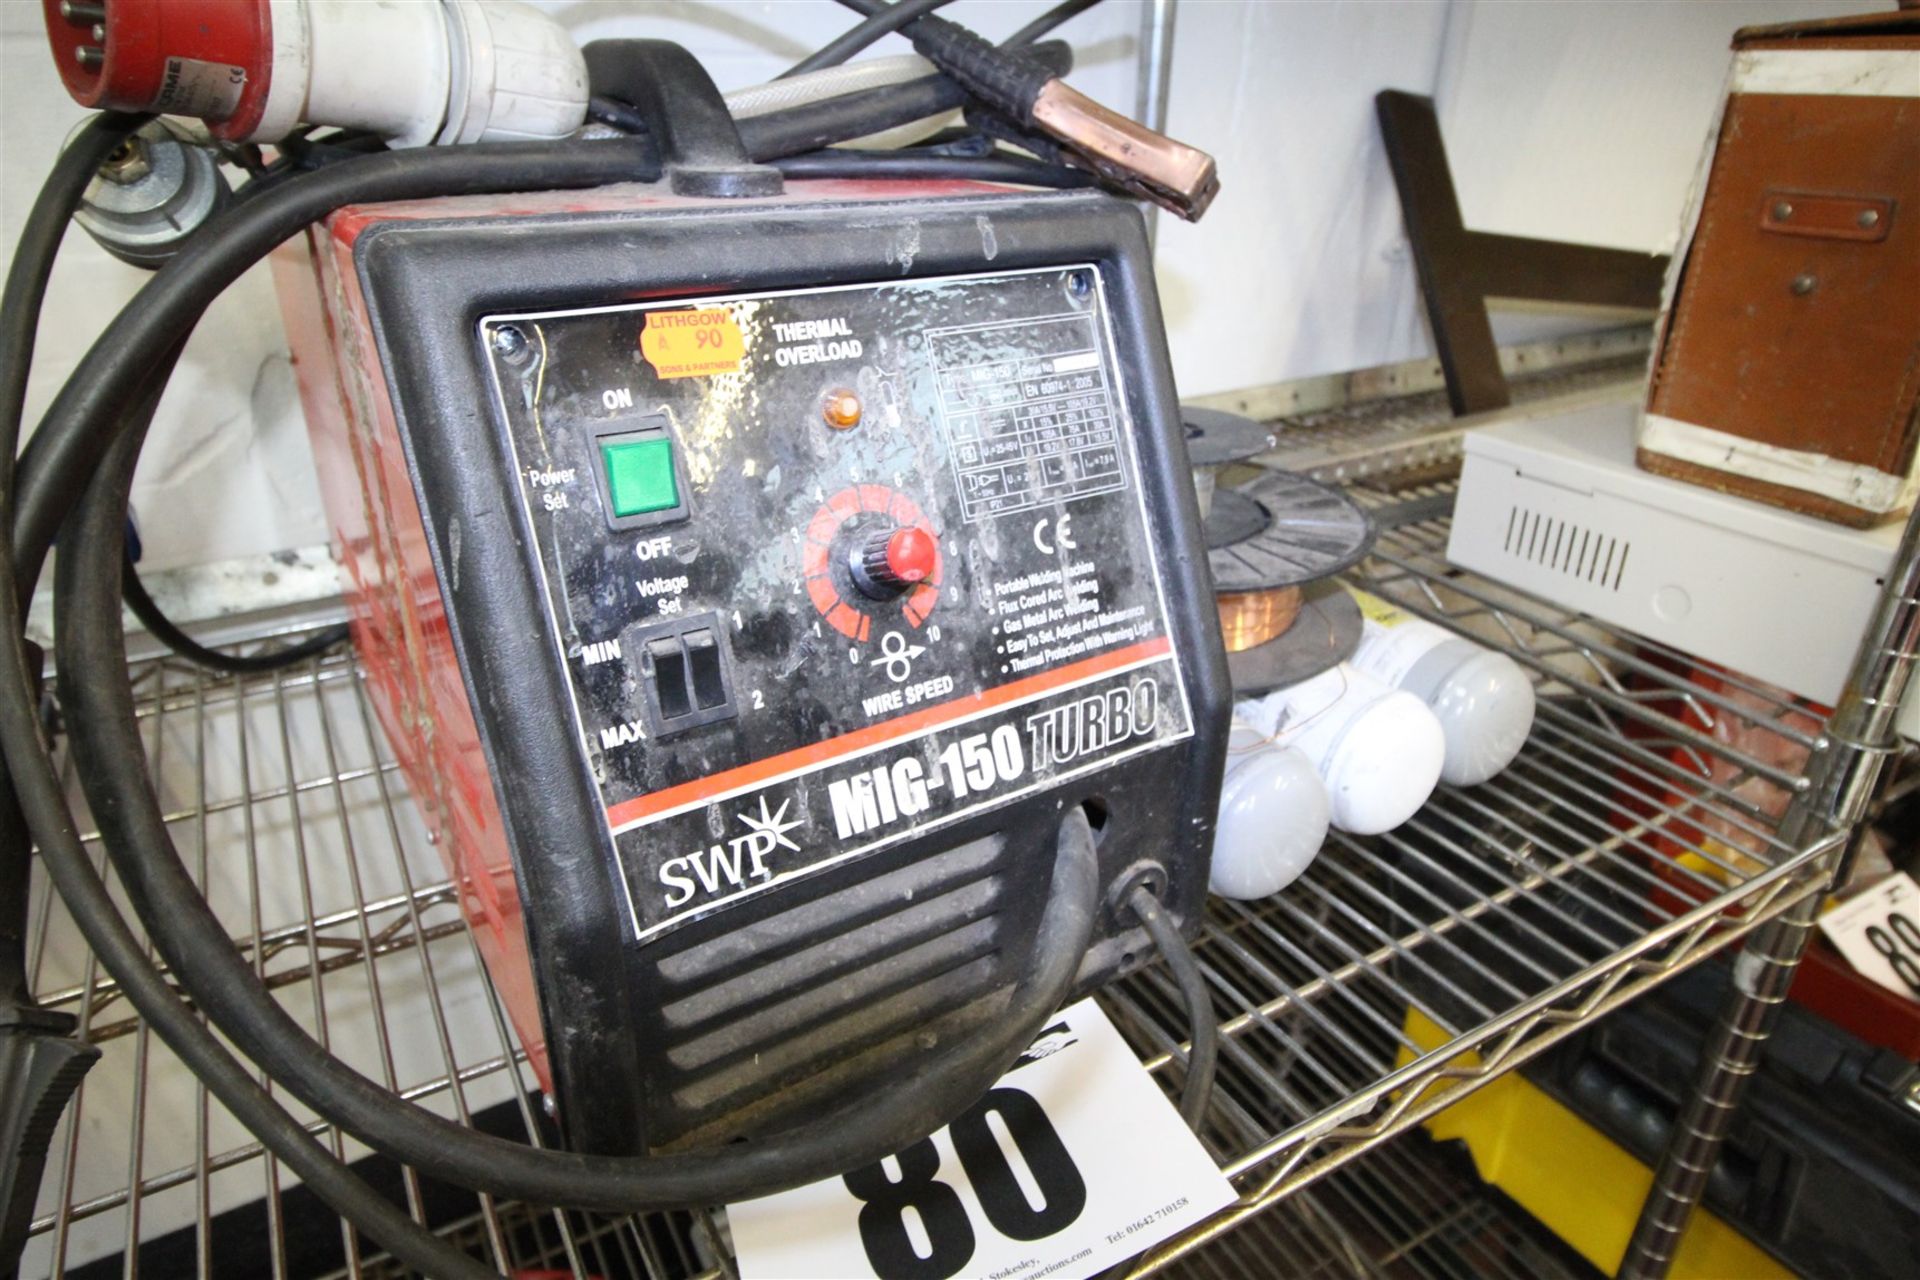 SWP MIG 150 TURBO PORTABLE 3-PHASE ELECTRIC MIG WELDER COMPLETE WITH CONTENTS OF 3 CYLINDERS OF